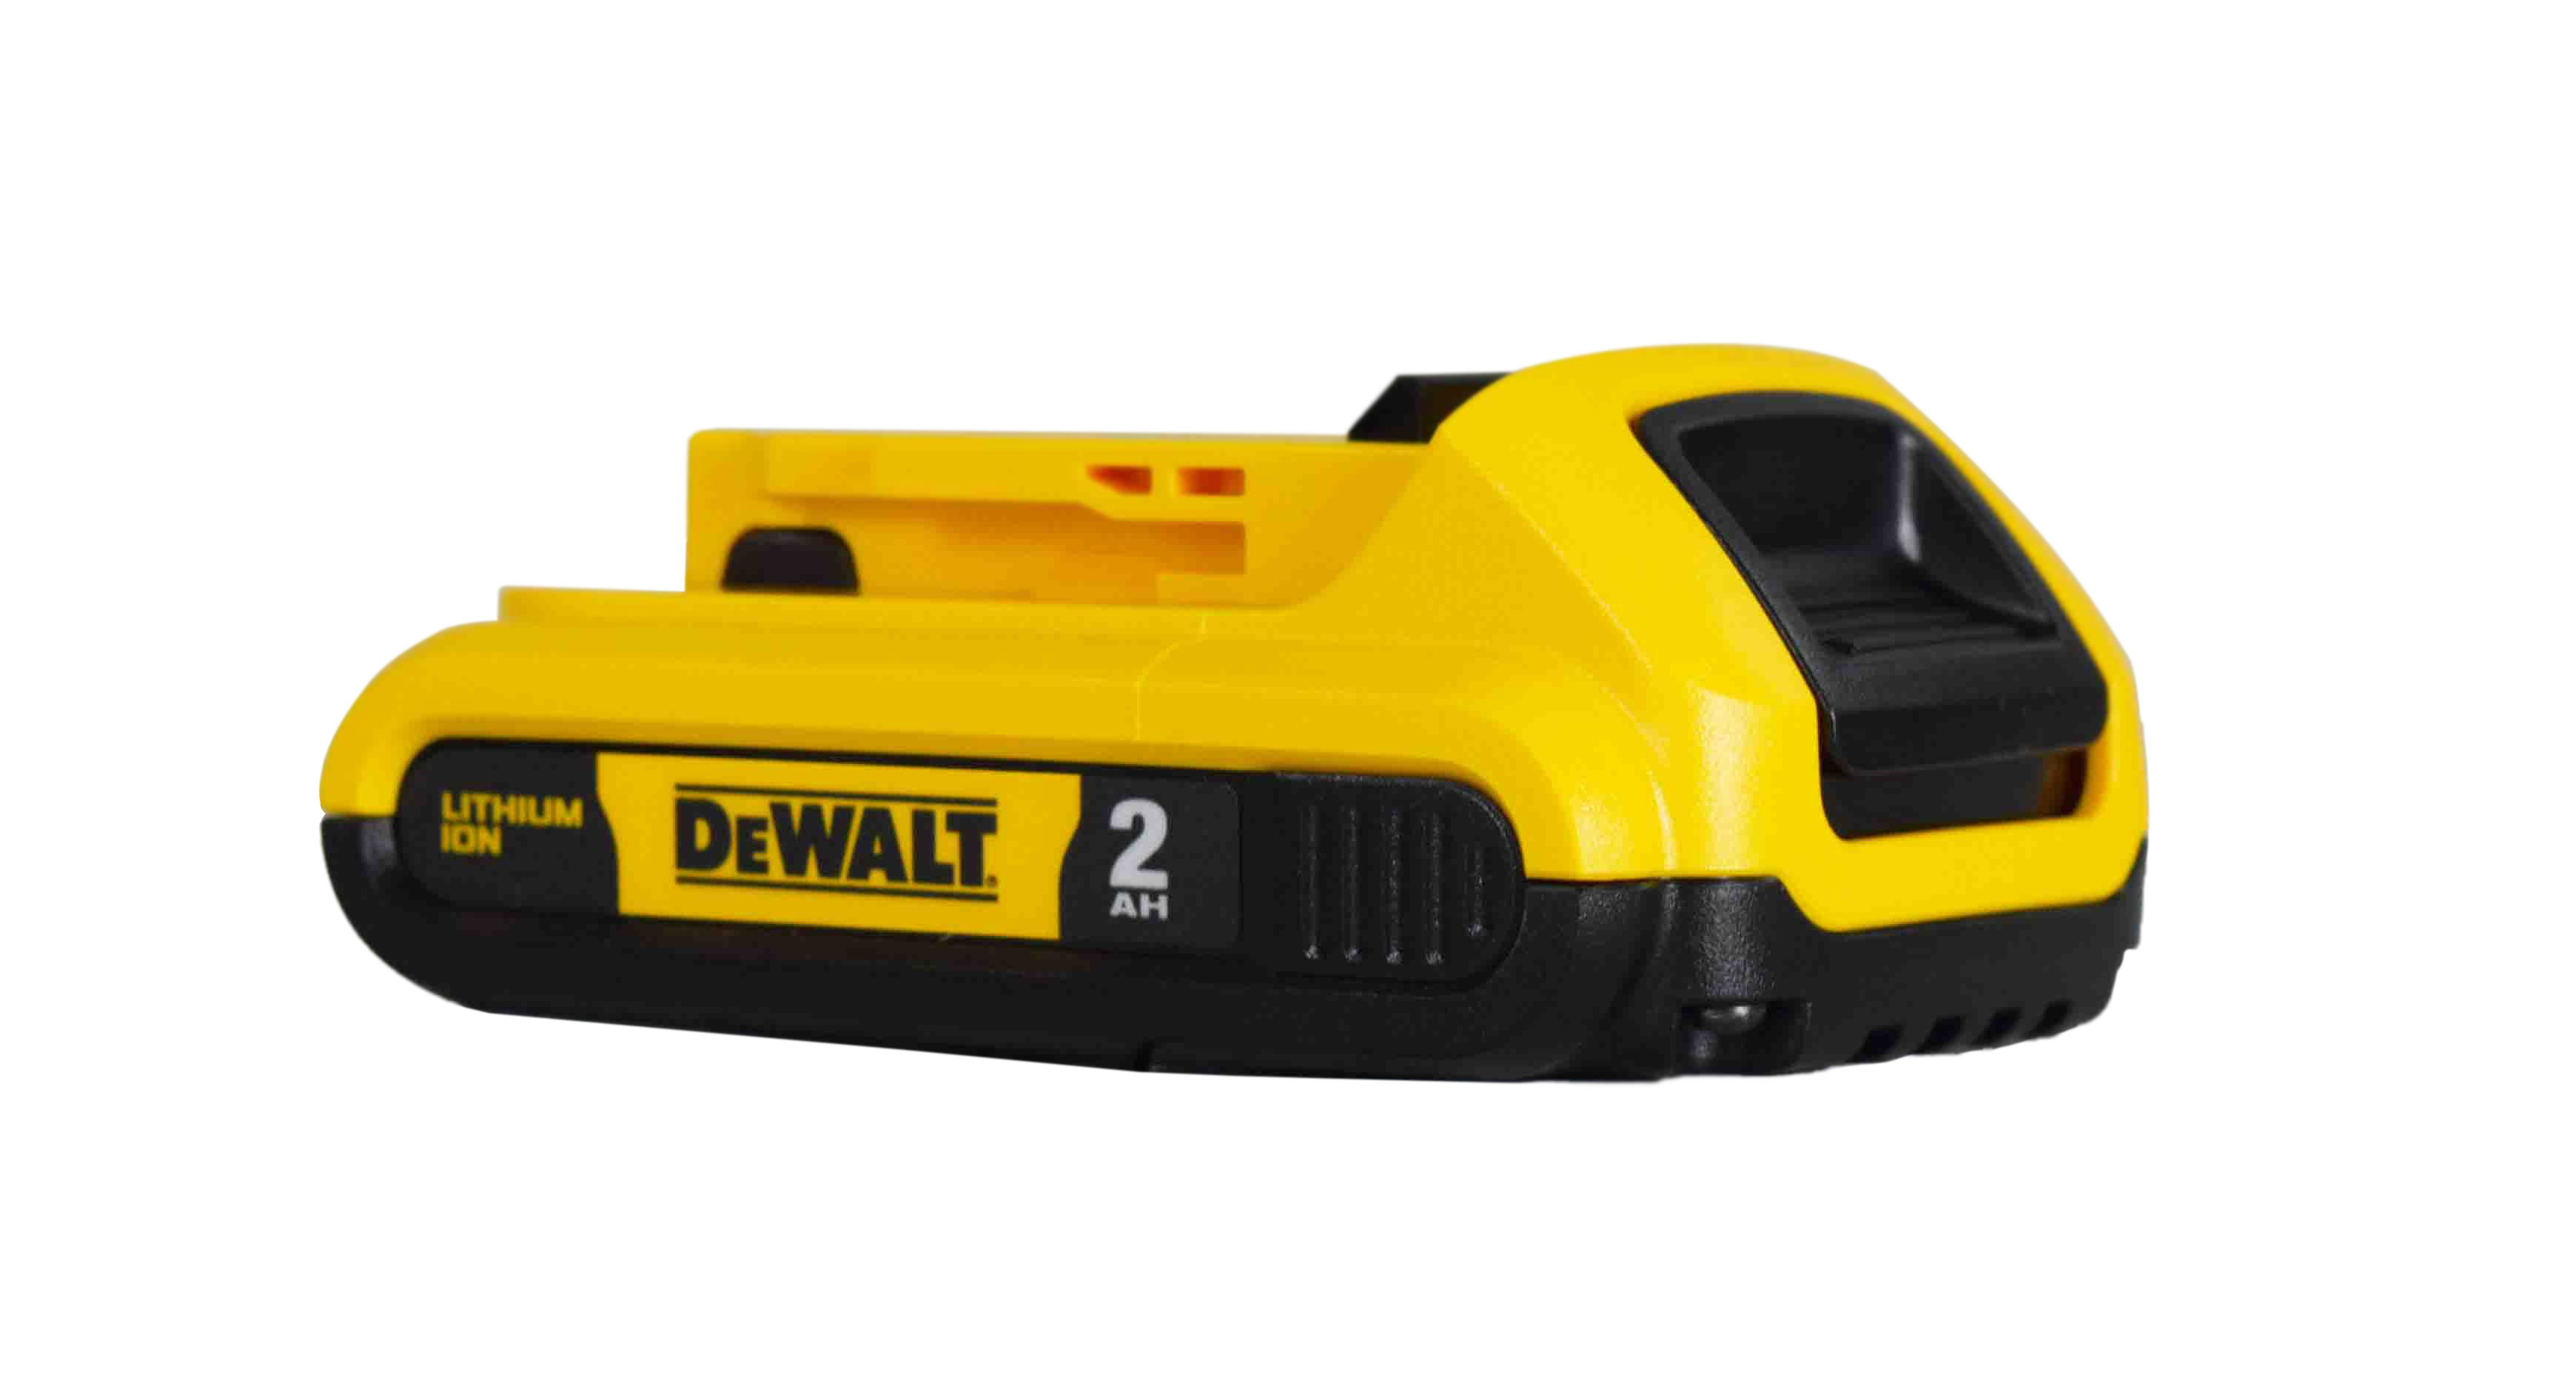 DeWALT Max Compact Lithium-Ion 20V 2Ah Battery DCB203 - Three Pack - image 3 of 5